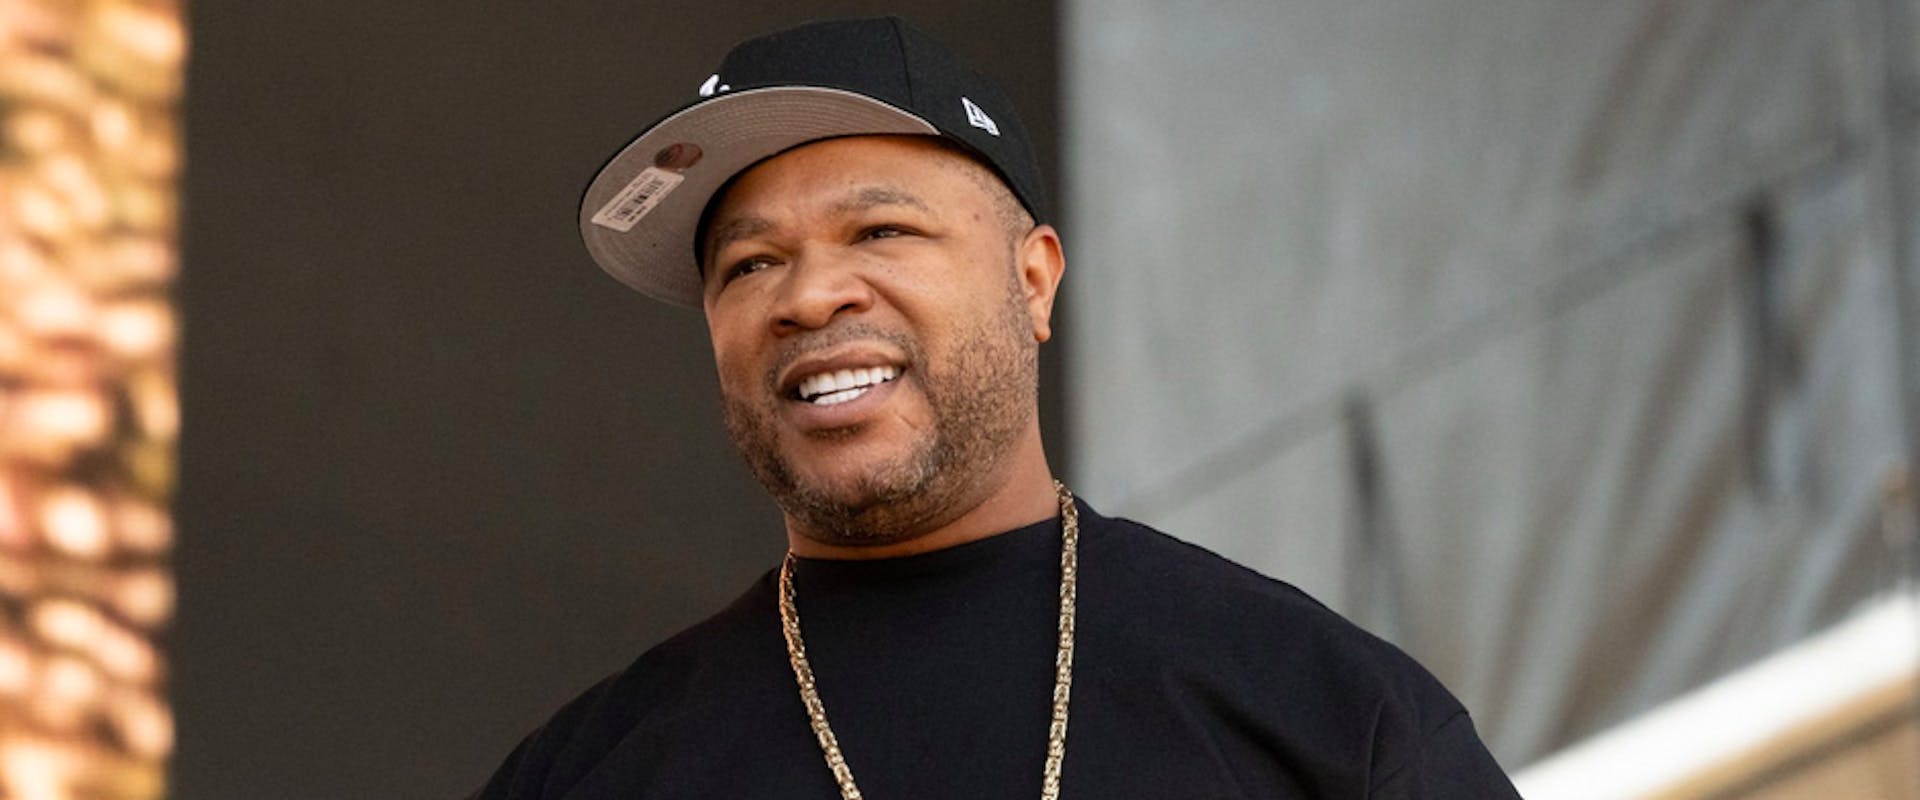 LOS ANGELES, CALIFORNIA - DECEMBER 18: Rapper Xzibit performs onstage during Once Upon a Time in LA Music Festival at Banc of California Stadium on December 18, 2021 in Los Angeles, California. 